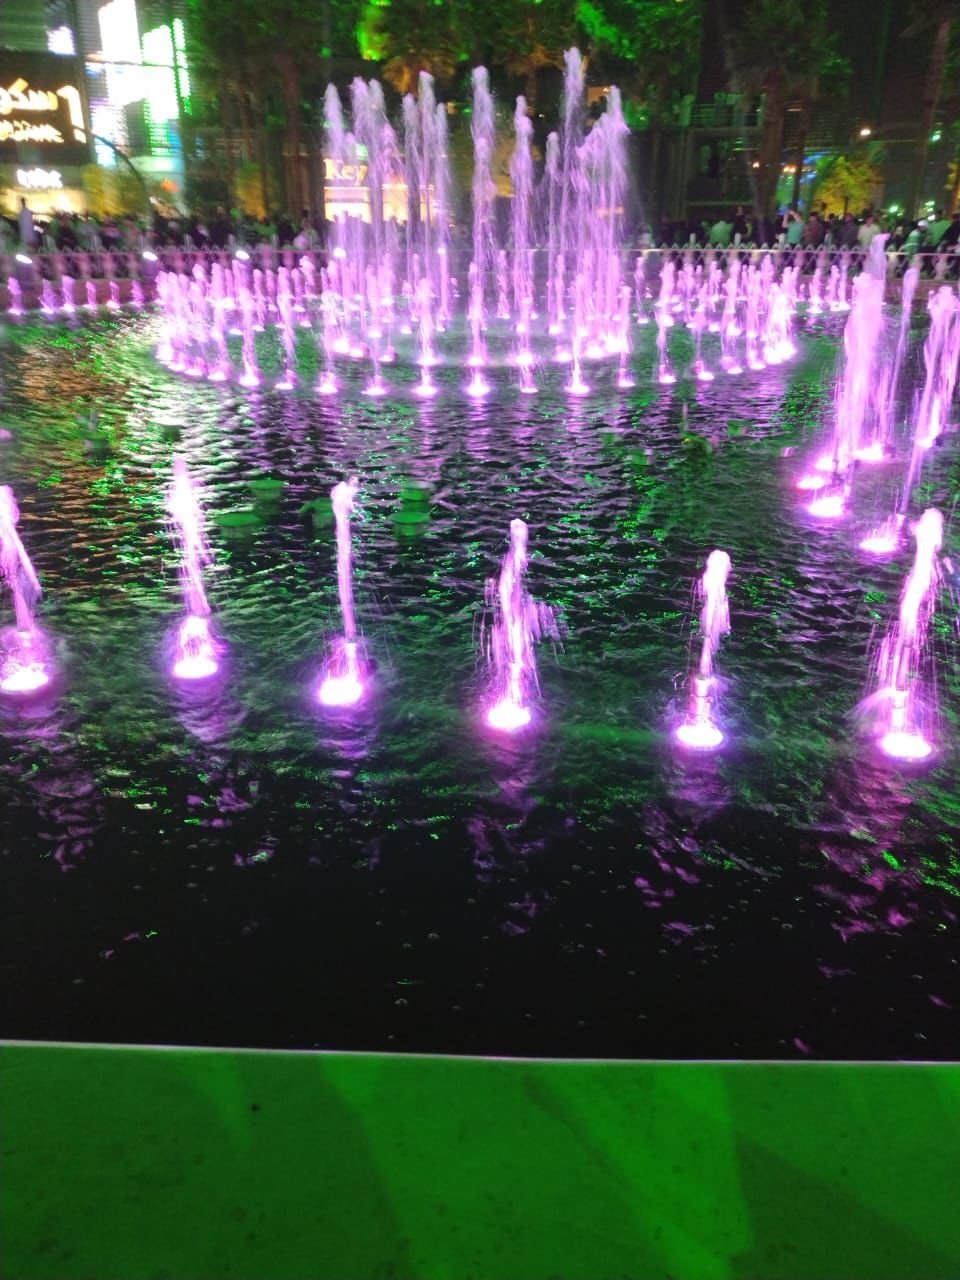 water, fountain, water feature, illuminated, motion, nature, no people, night, plant, outdoors, light, reflection, green, tree, architecture, long exposure